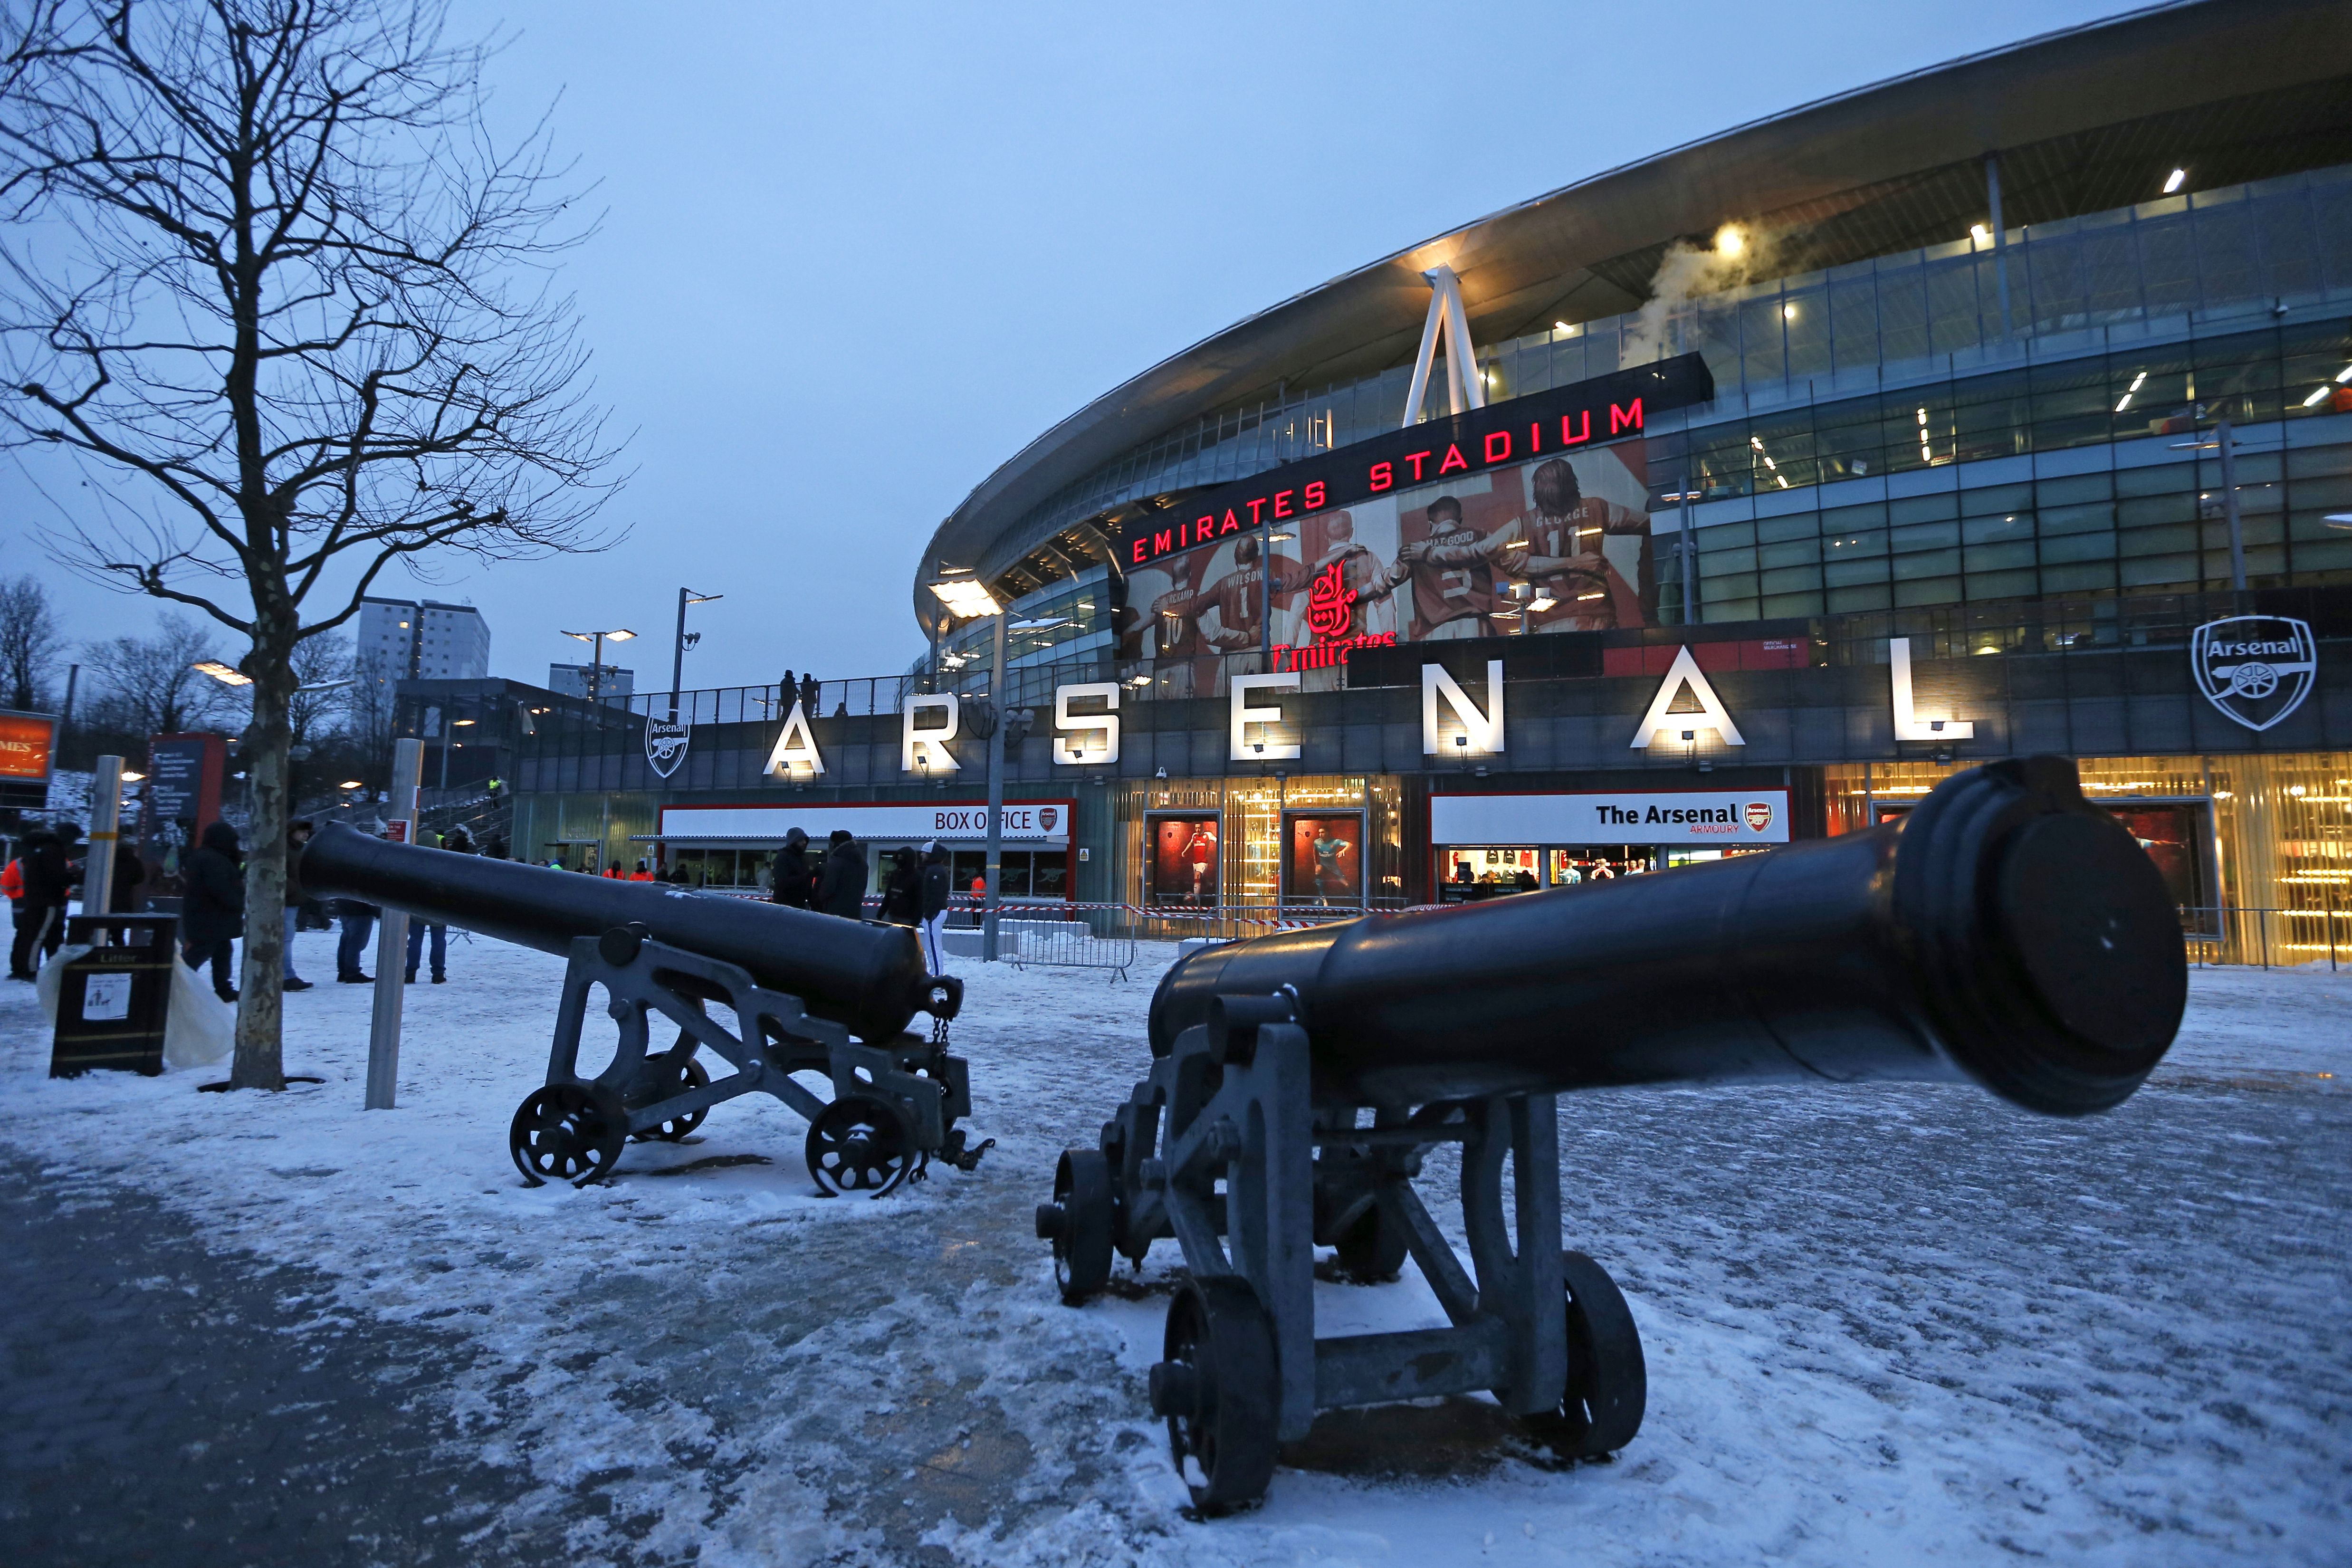 The snow-covered area outside the Emirates Stadium is pictured prior to kick off in the English Premier League football match between Arsenal and Manchester City at the Emirates Stadium in London on March 1, 2018.  / AFP PHOTO / IKIMAGES / Ian KINGTON / RESTRICTED TO EDITORIAL USE. No use with unauthorized audio, video, data, fixture lists, club/league logos or 'live' services. Online in-match use limited to 45 images, no video emulation. No use in betting, games or single club/league/player publications.  /         (Photo credit should read IAN KINGTON/AFP via Getty Images)